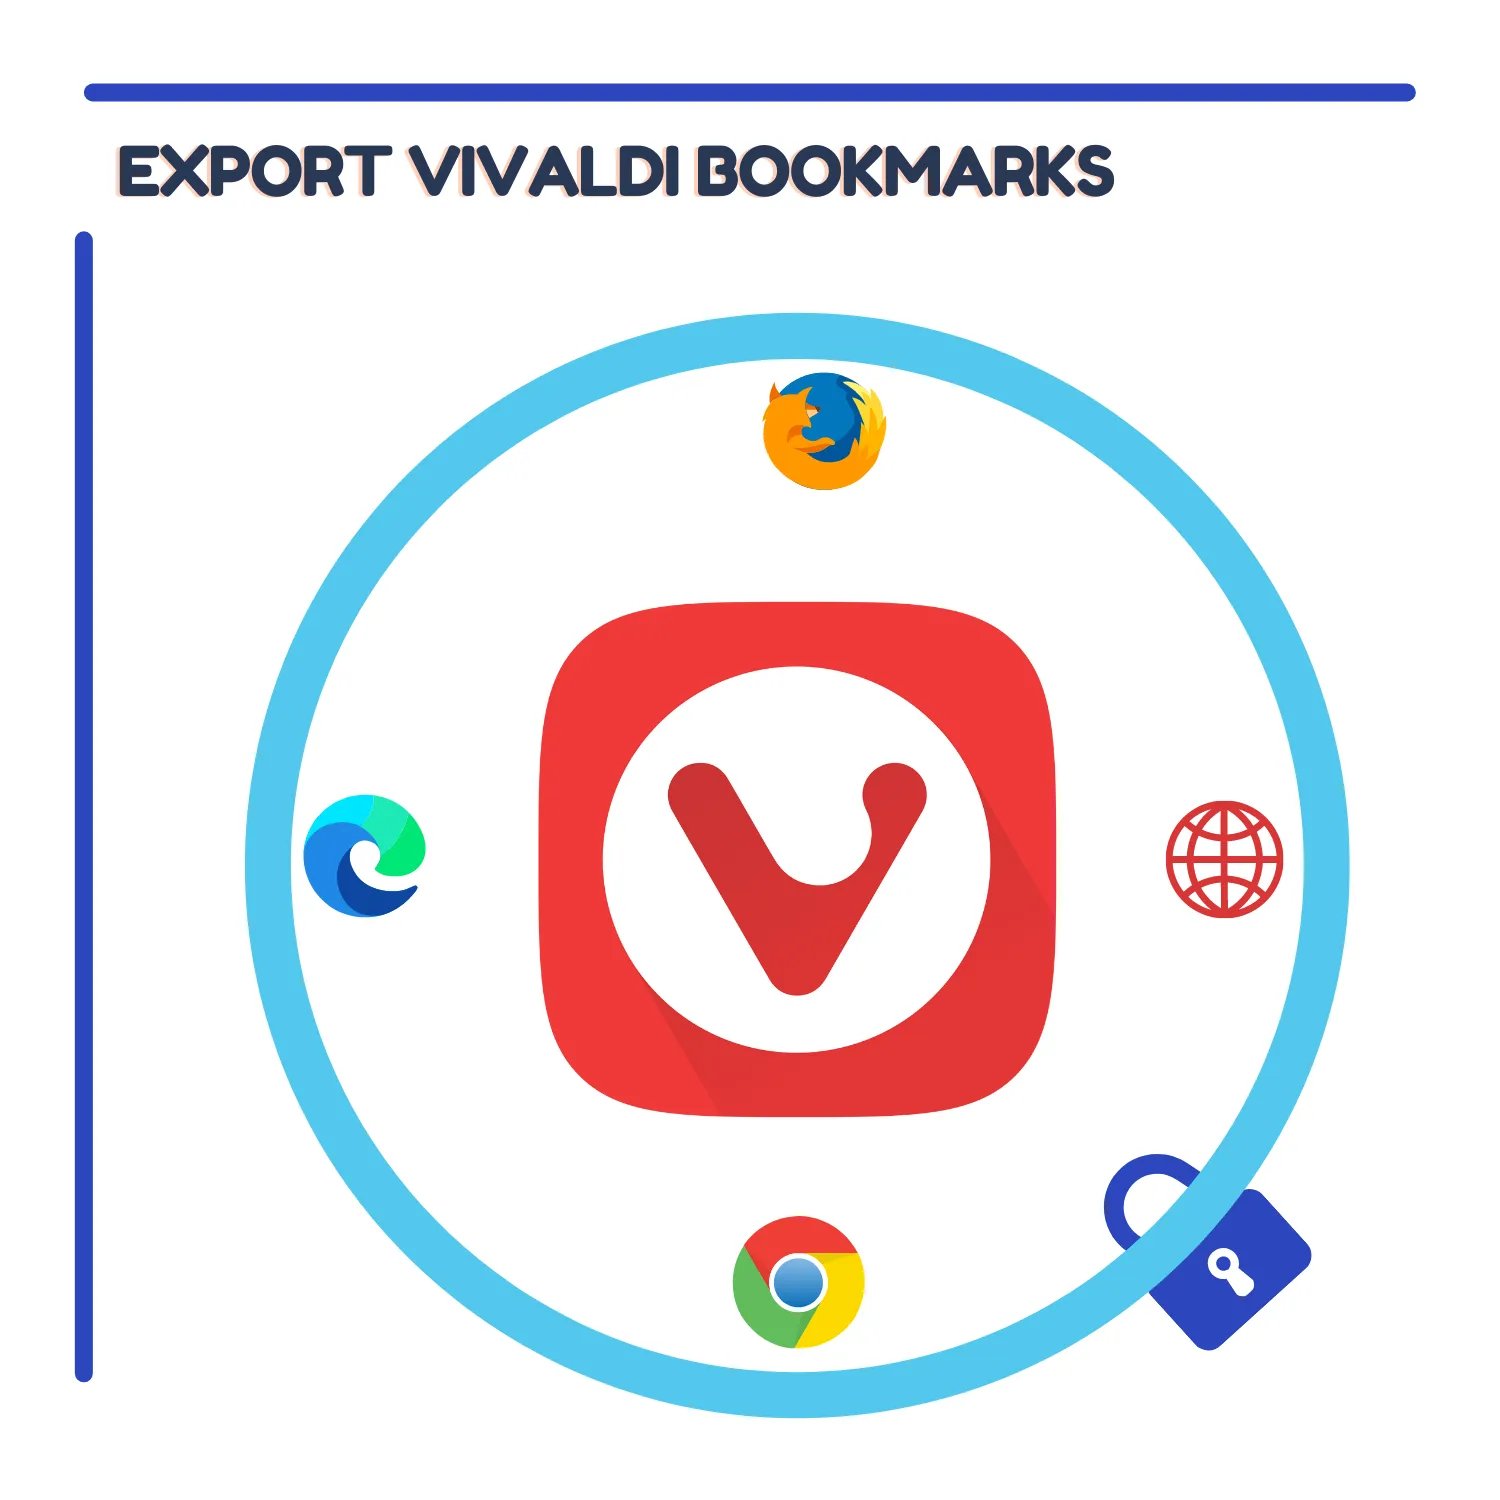 Exporting Vivaldi Bookmarks to Other Browsers